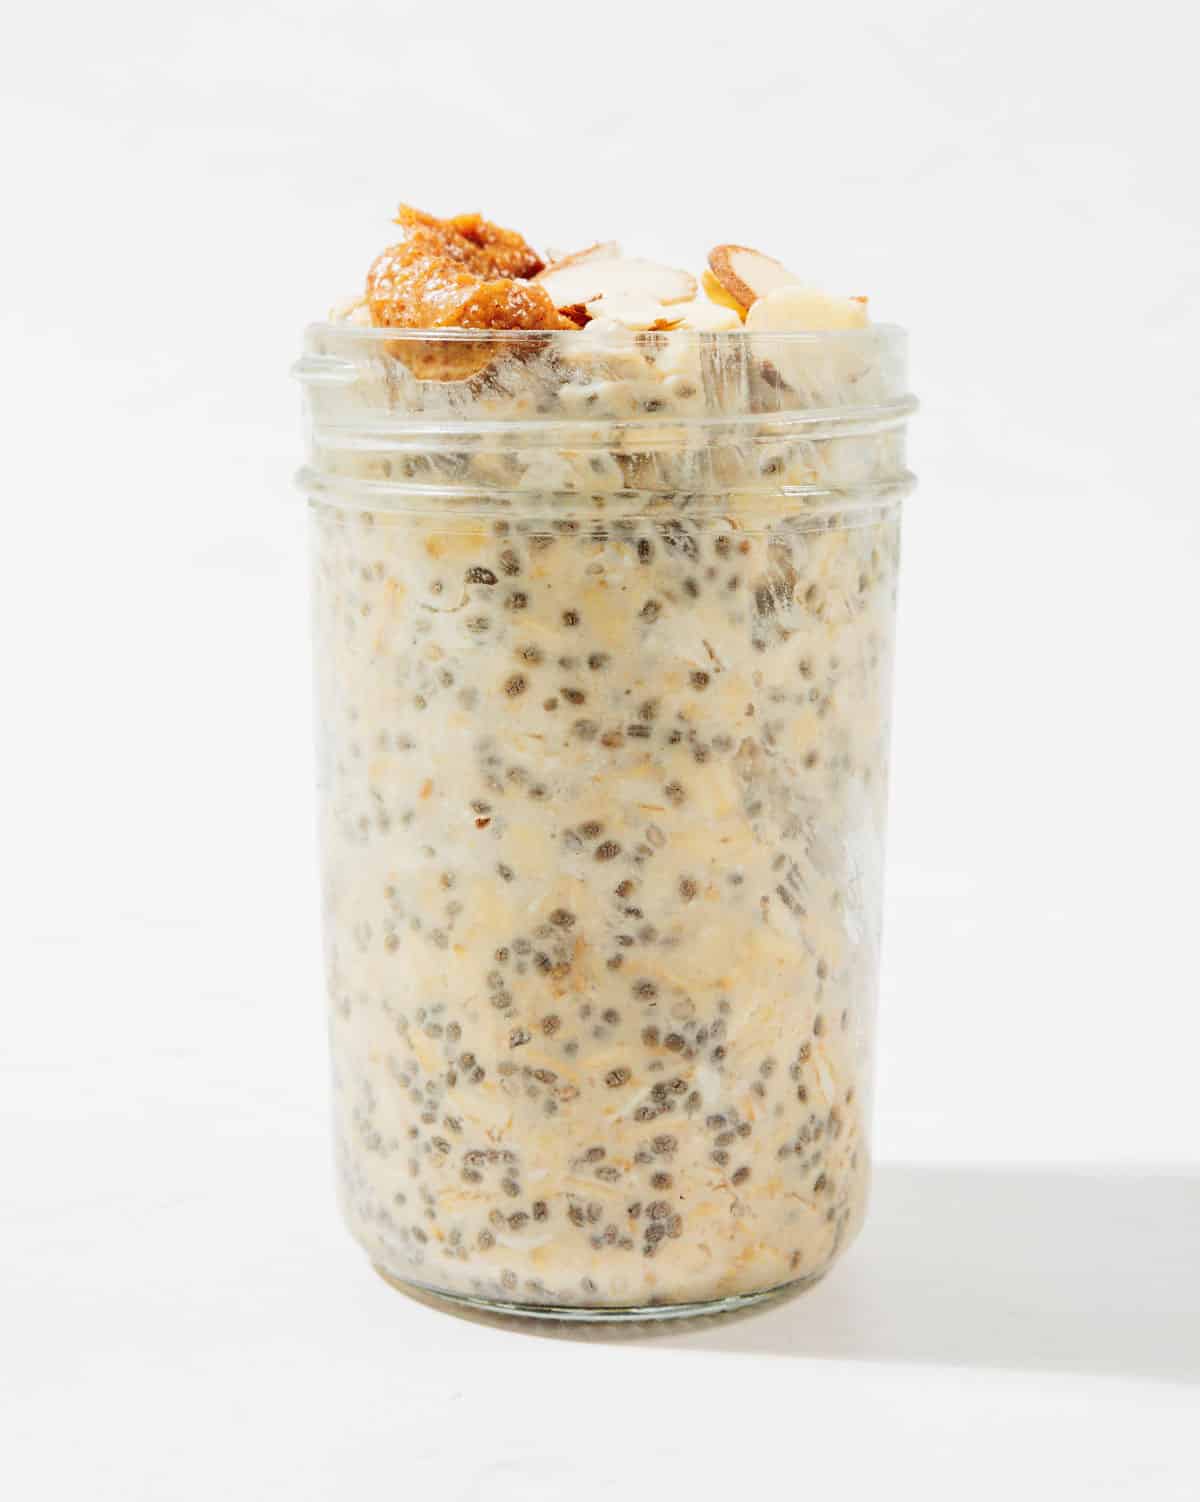 Ingredients for protein overnight oats in a jar.